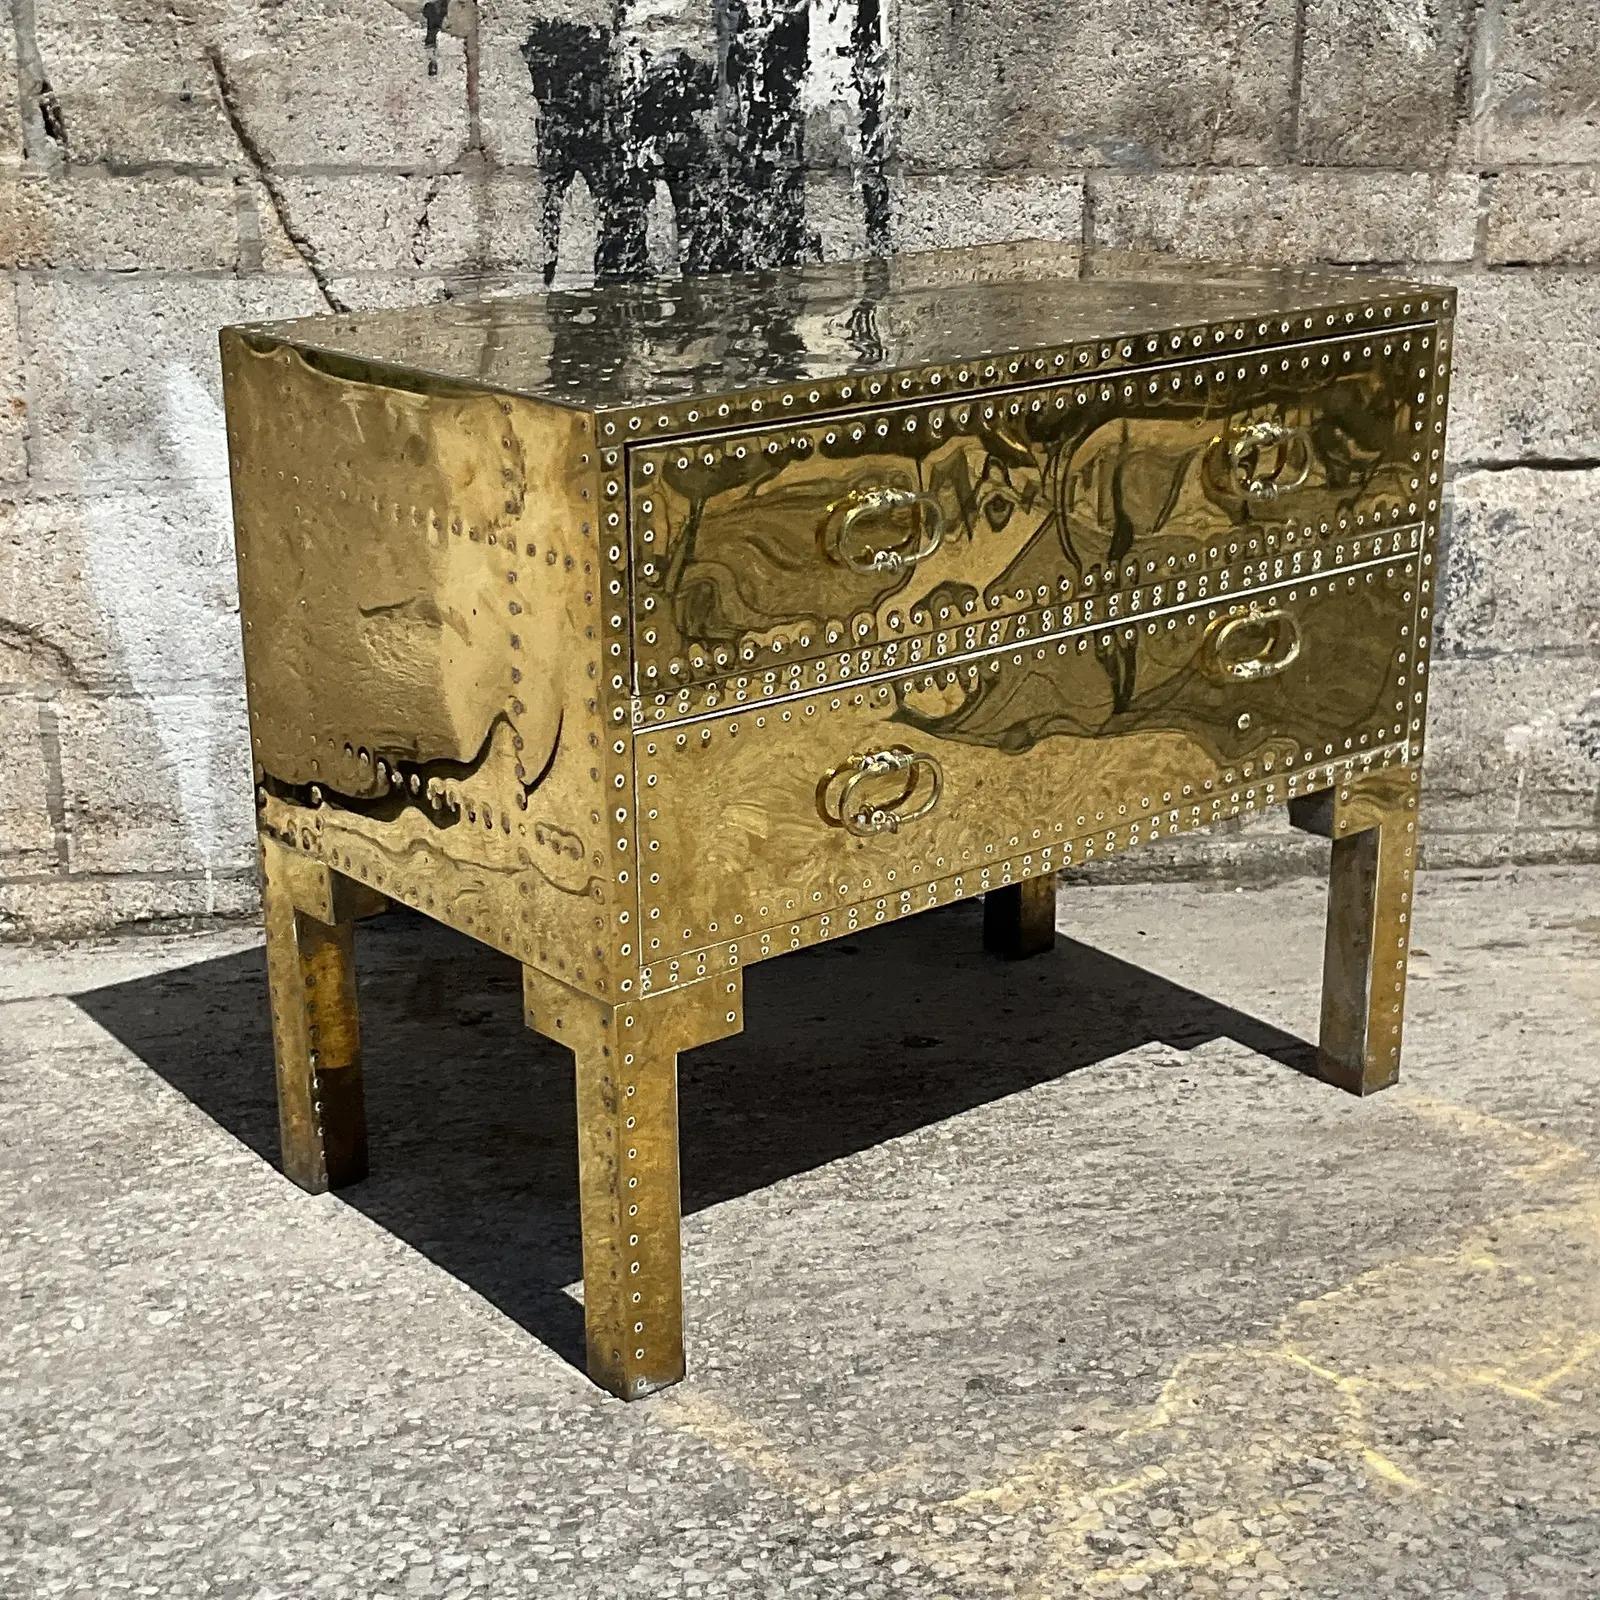 Incredible vintage Regency brass chest of drawers. Beautiful nailhead detail with a bright mirrored brass shine. Acquired from a Palm Beach estate.